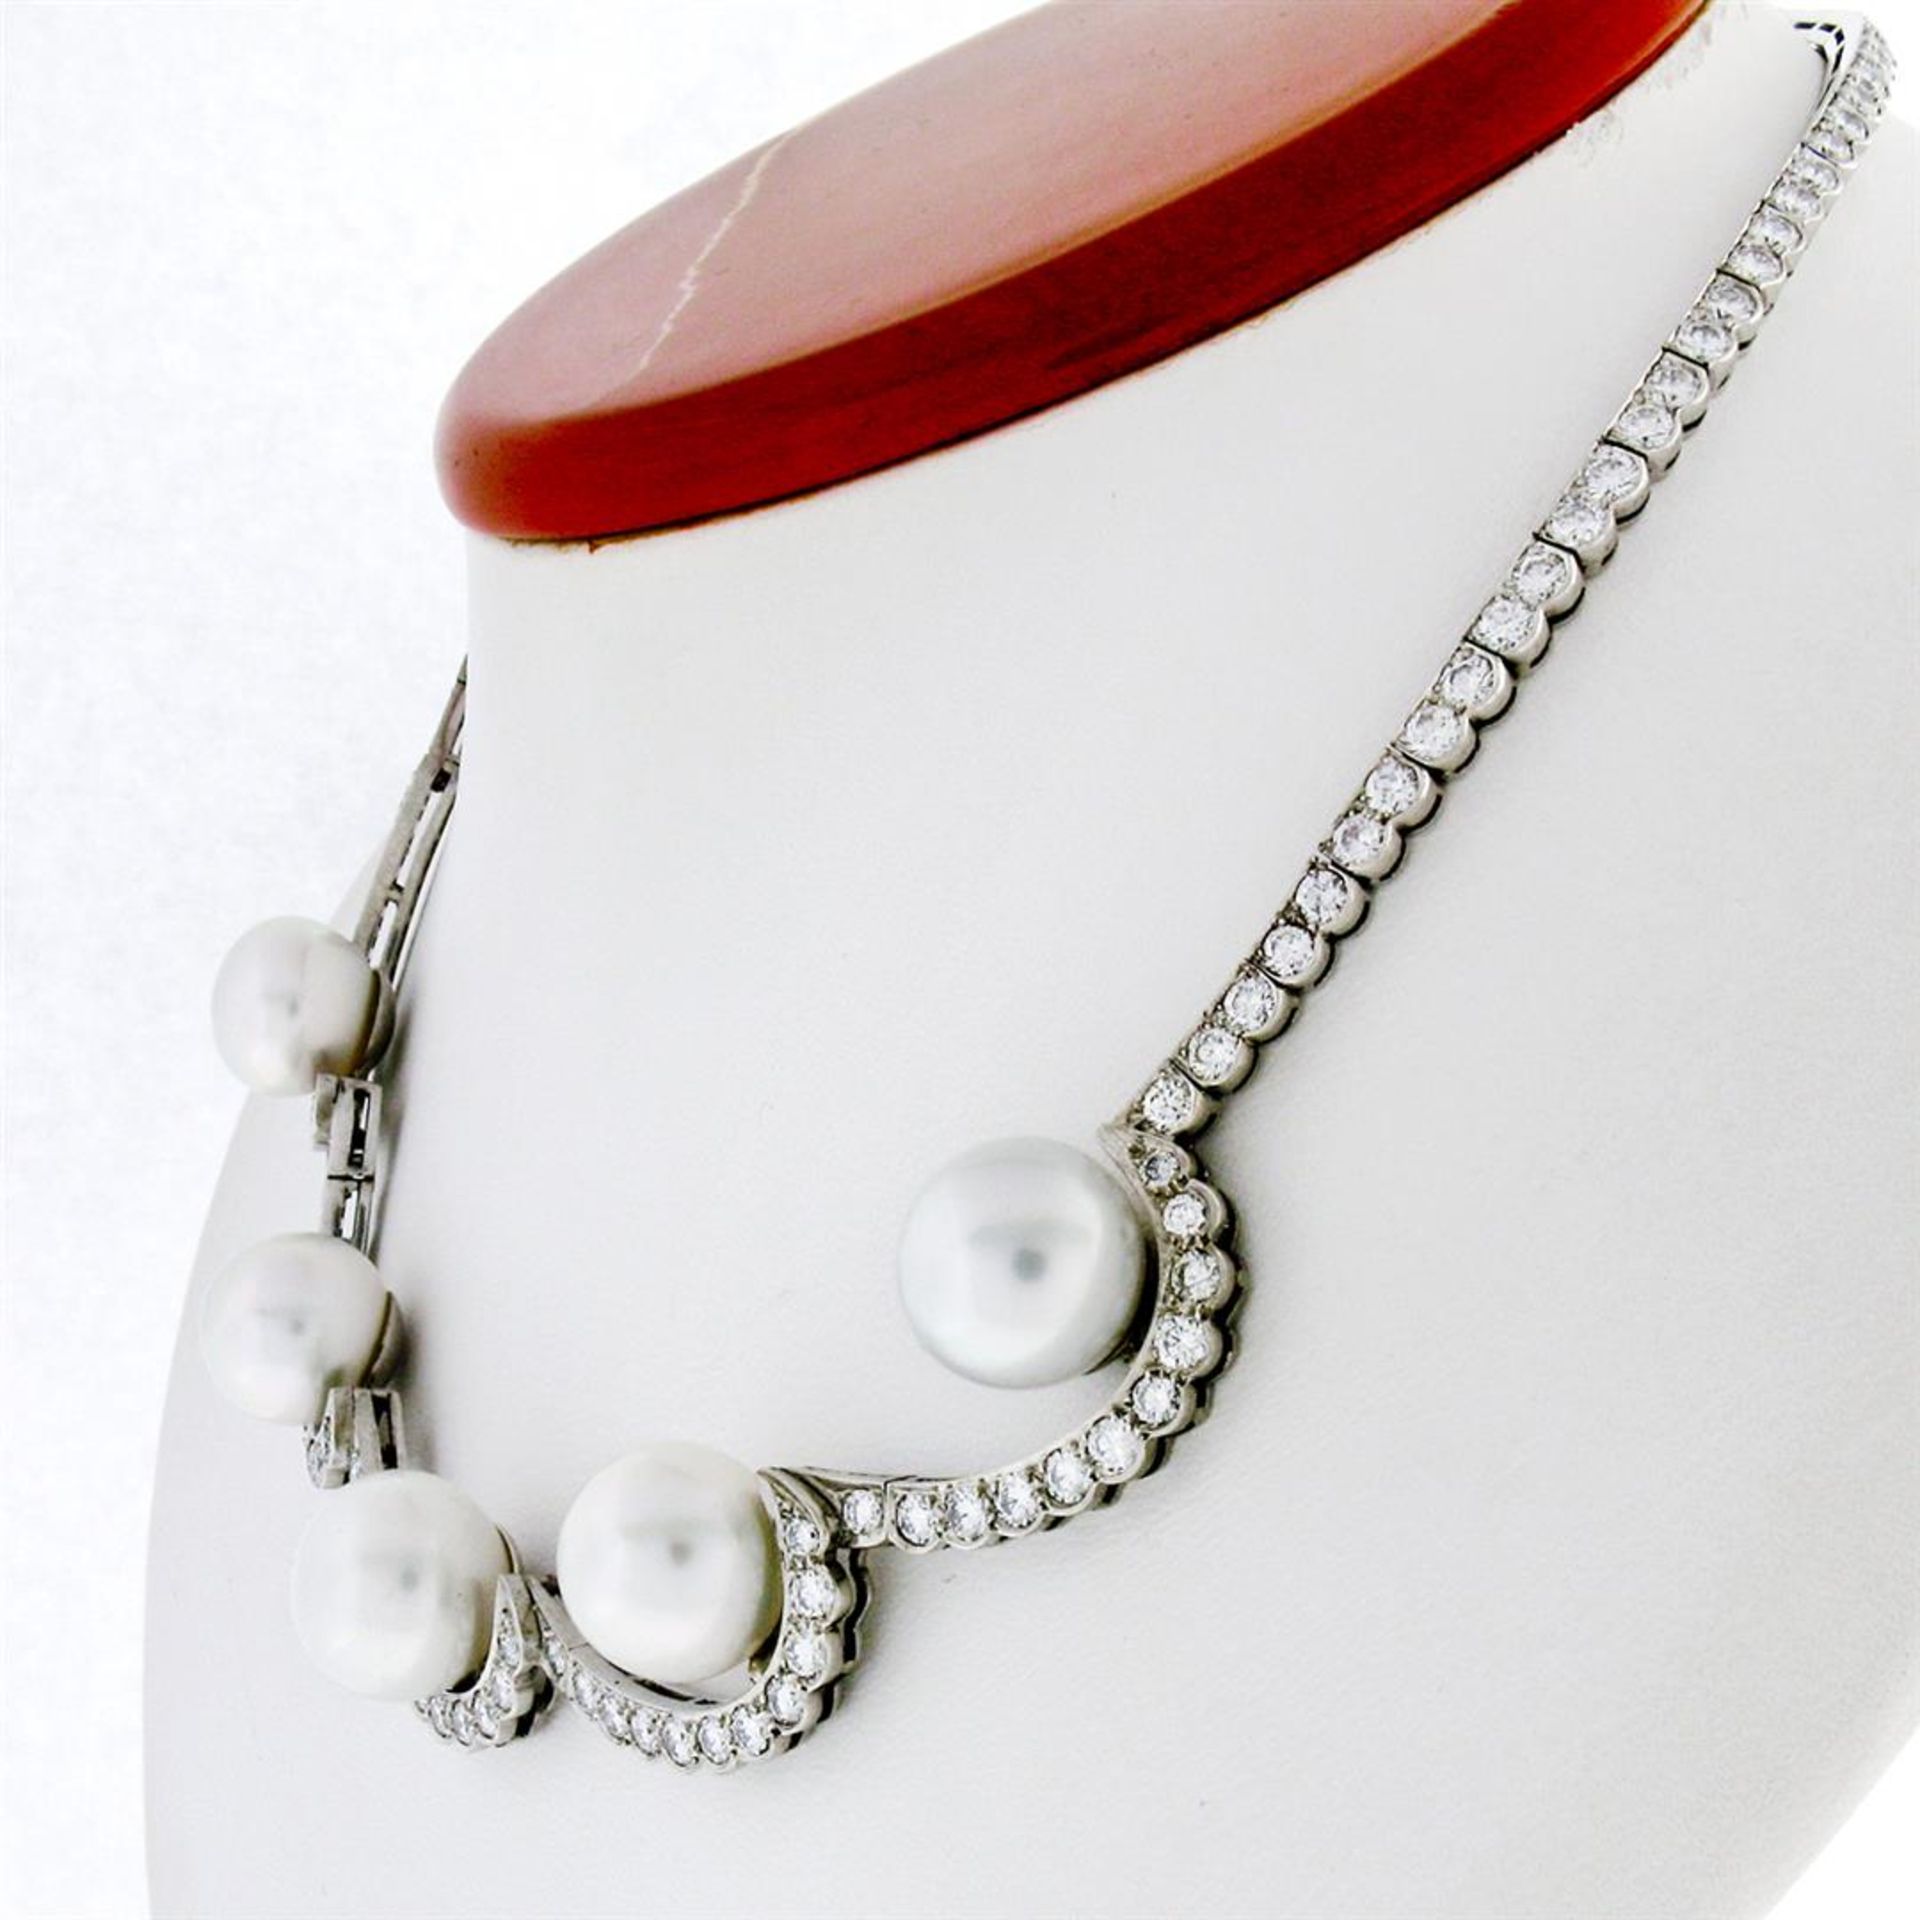 Platinum 10.25ctw Diamond & Floating South Sea Pearl Statement Necklace - Image 4 of 9